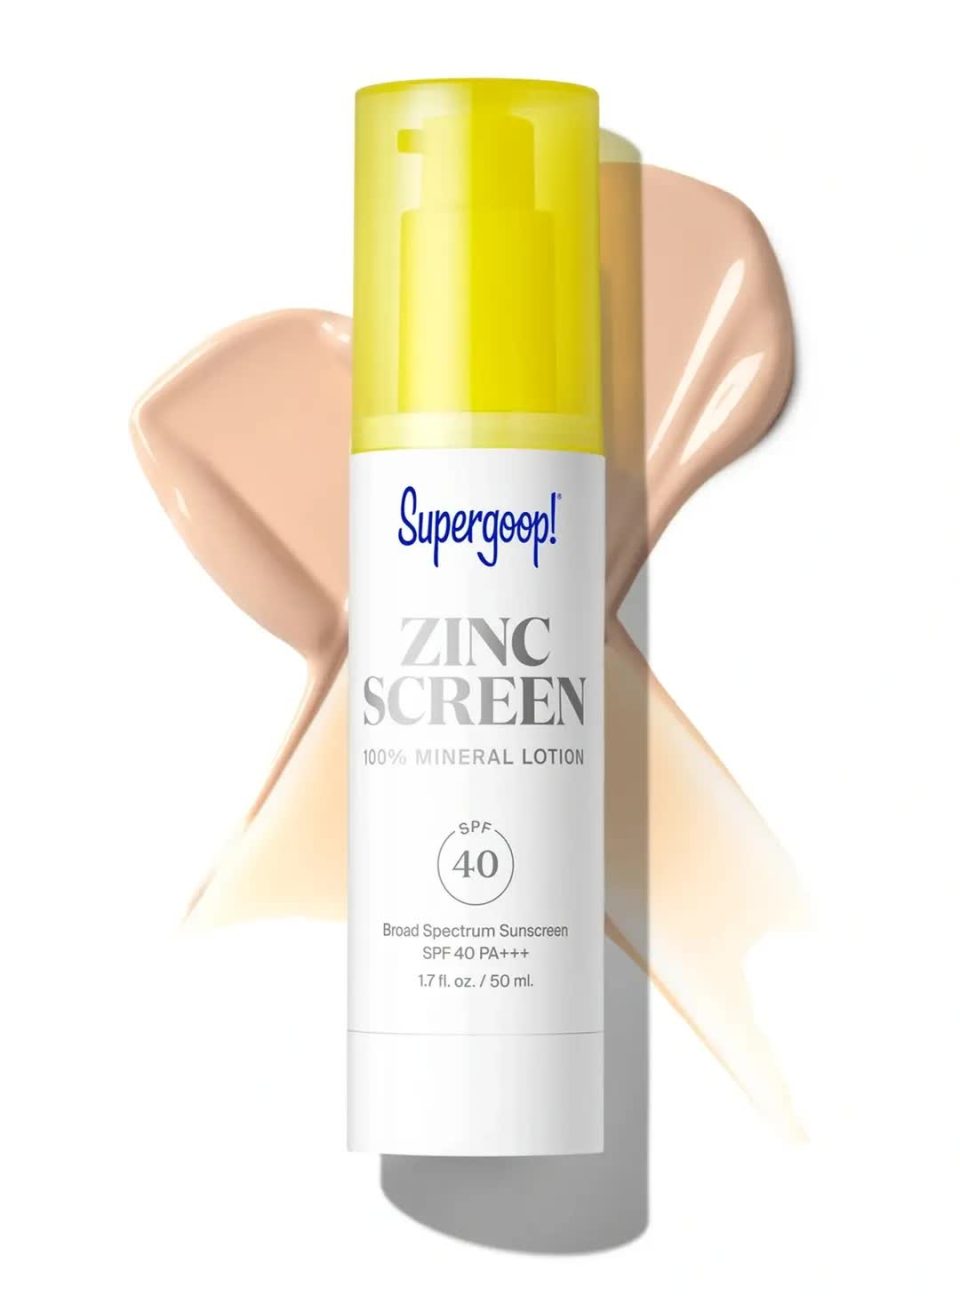 supergoop-zincscreen-100_-mineral-lotion-spf-40-pack-and-texture_484d87f9-b858-4741-82e3-53dffe393187